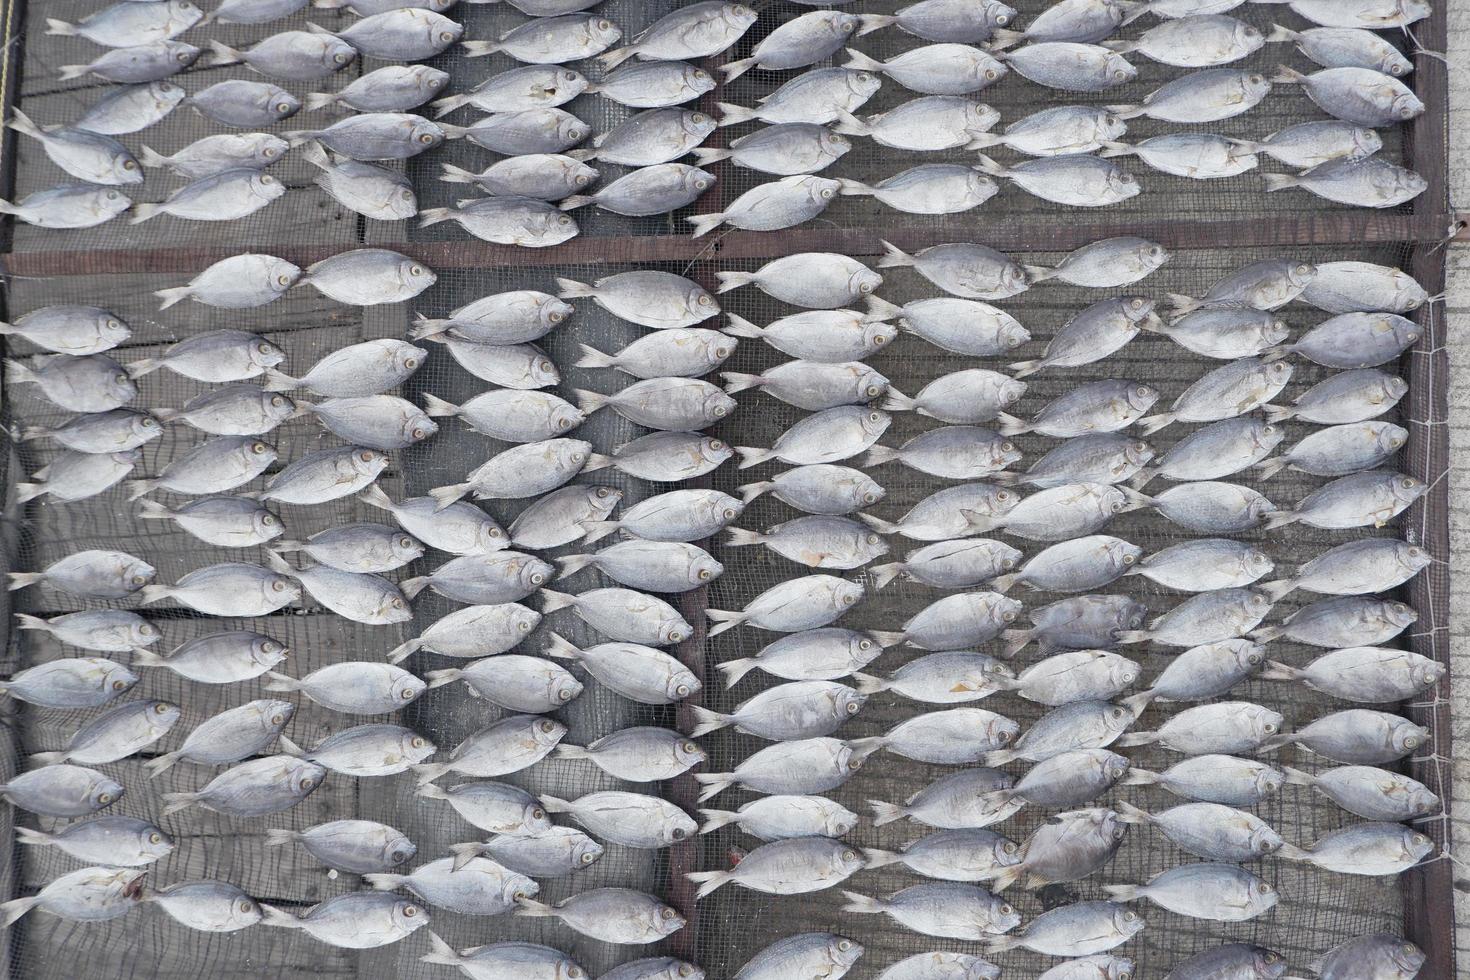 fish from fishermen that are dried in the sun to make it more durable, the process of making salted fish photo